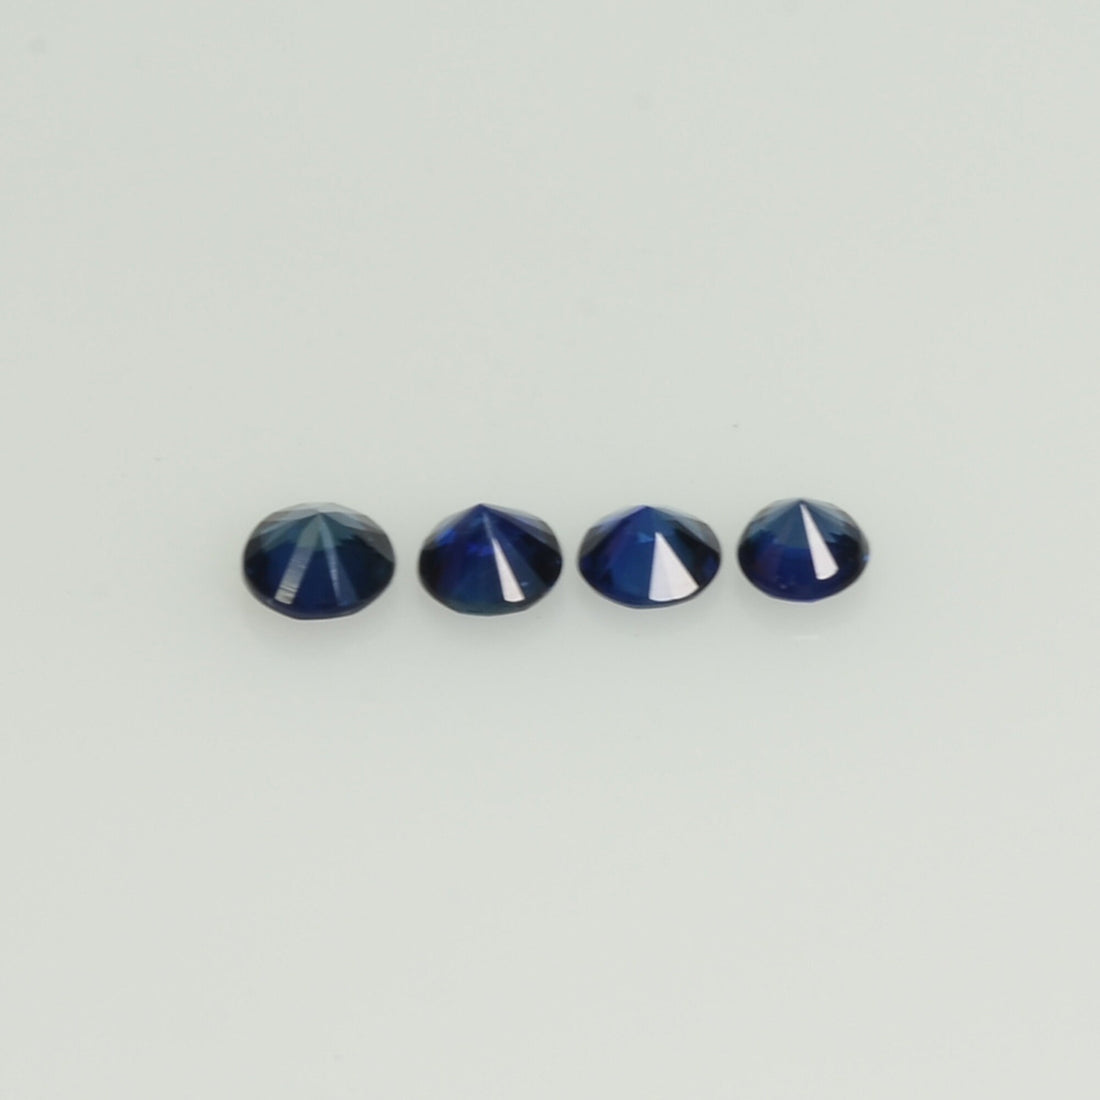 1.5-5.3 mm Natural Blue Sapphire Loose Gemstone Round Diamond Cut Vs Quality AAA+ Color